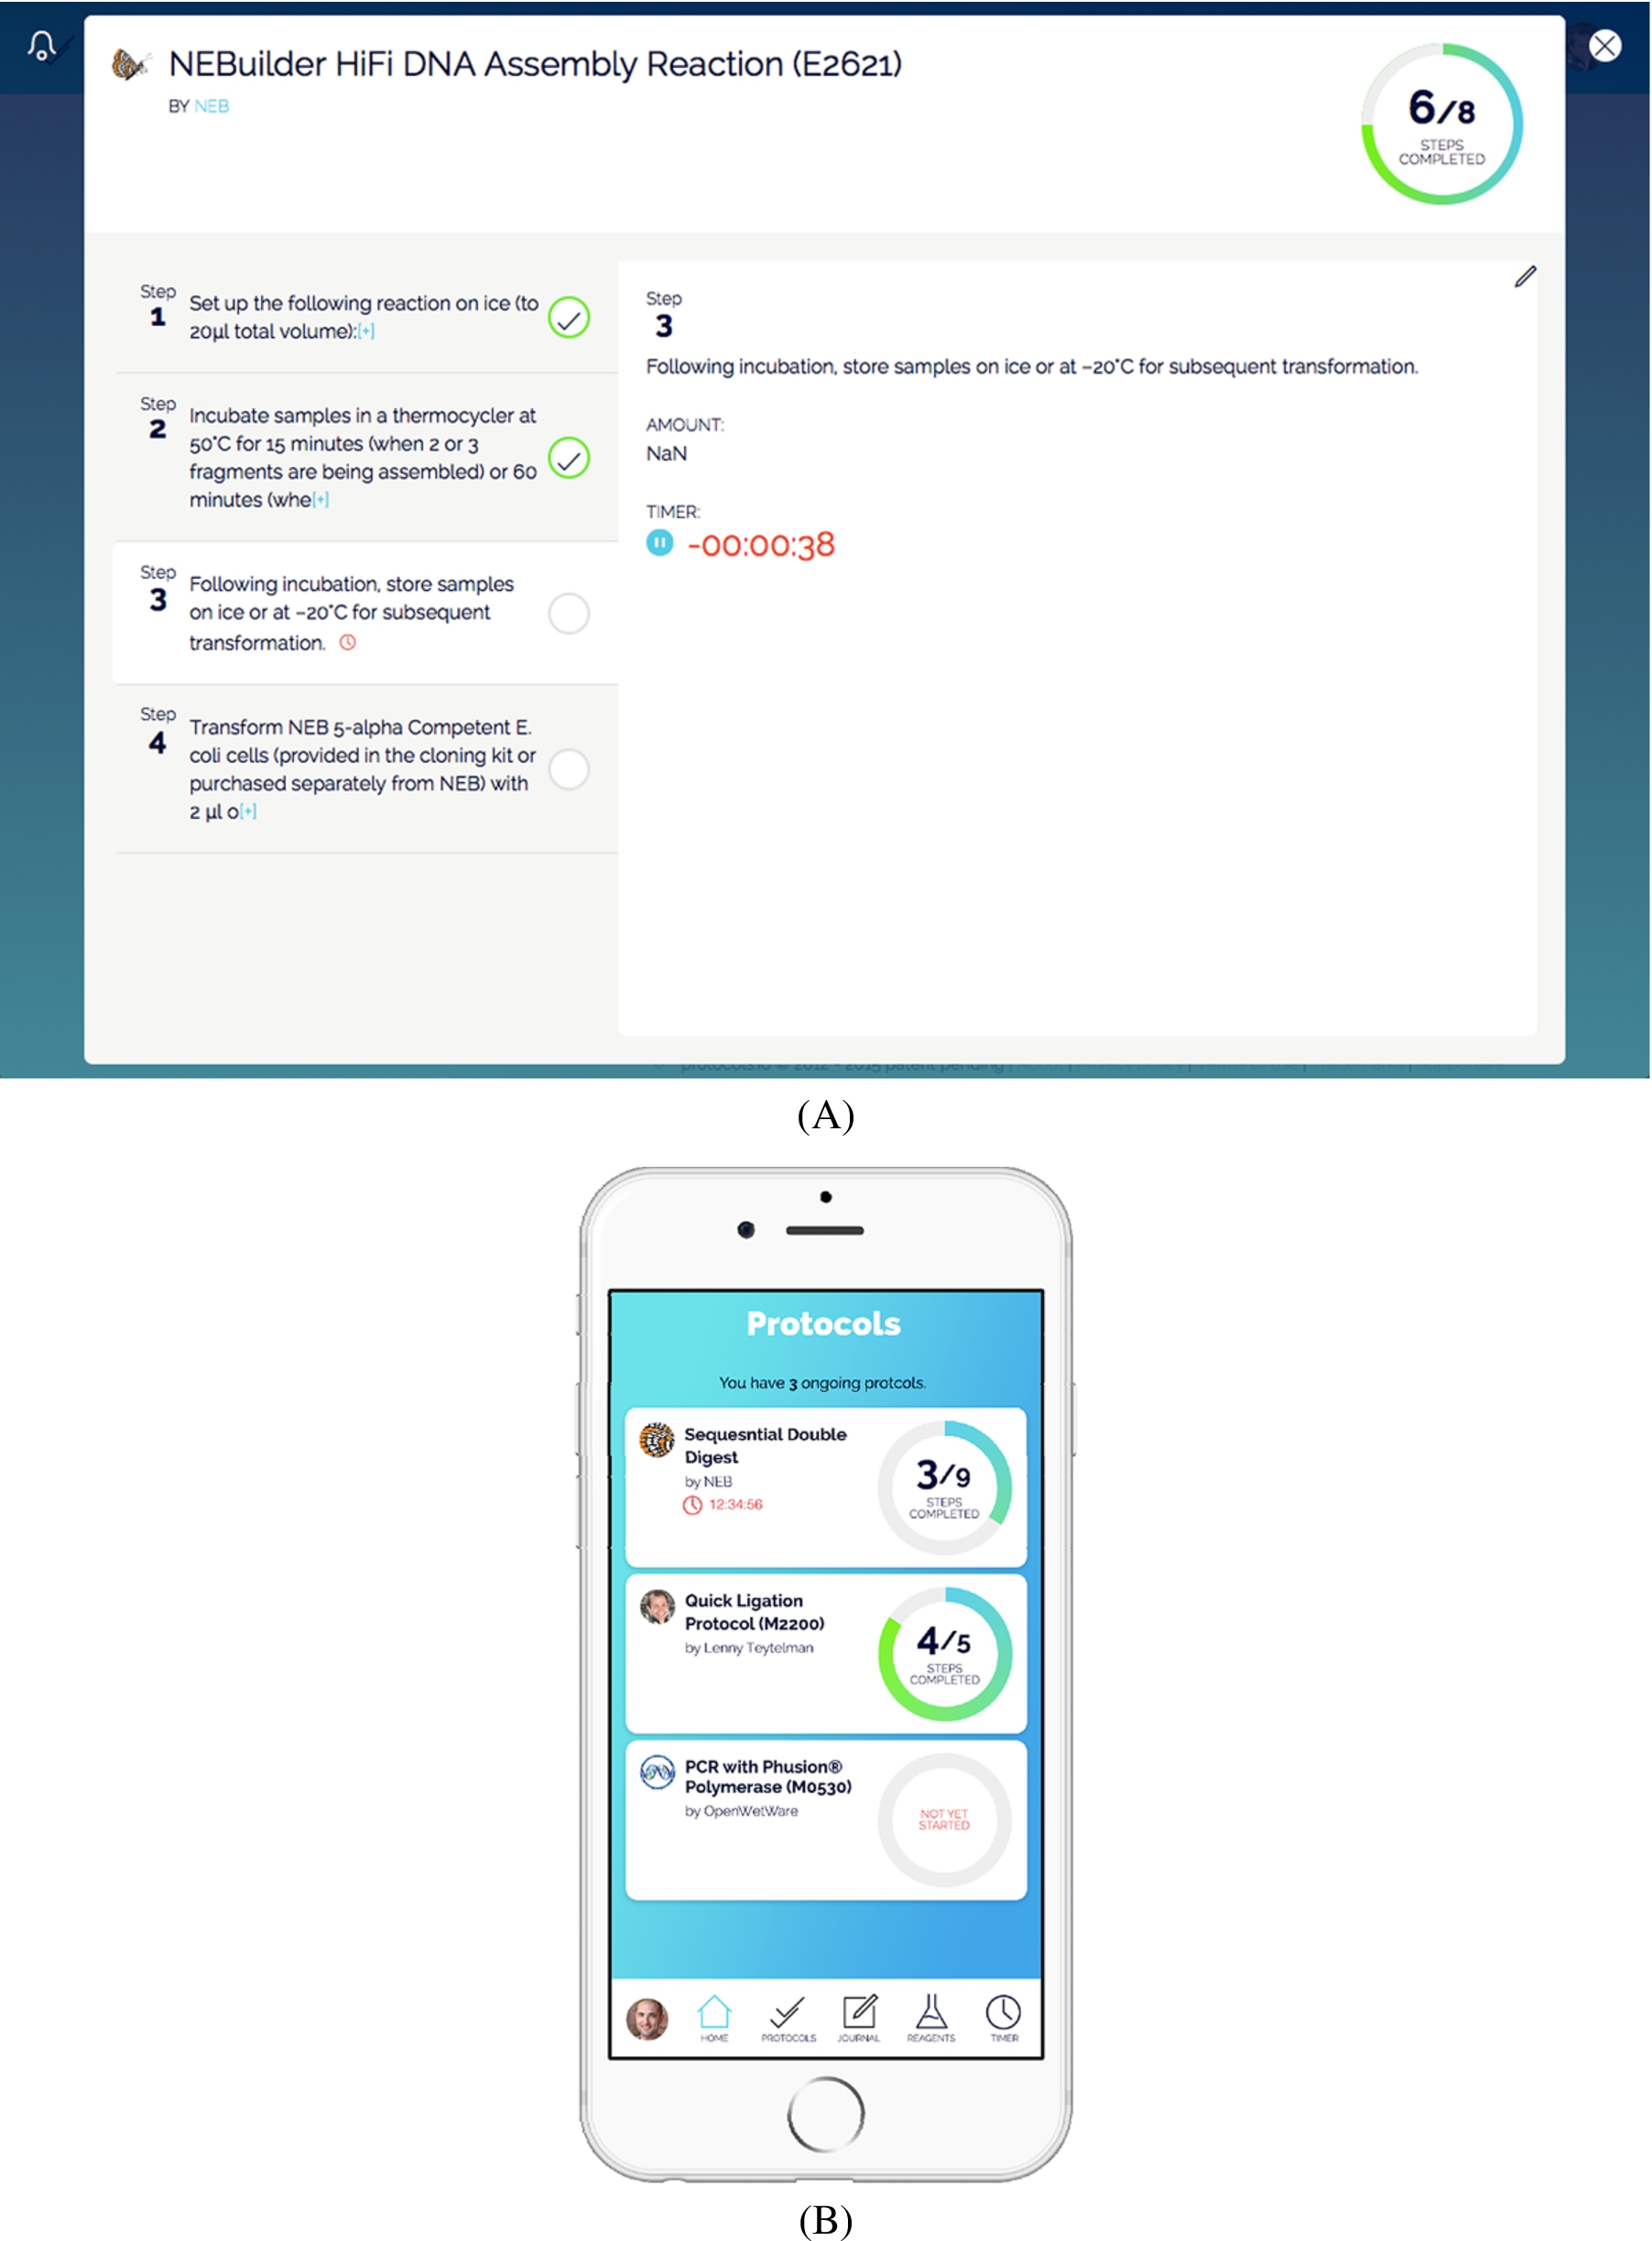 Checklist functionality for following a protocols.io method. Panel (A) demonstrates the website interface and panel (B) shows the iOS mobile view. (Colors are visible in the online version of the article; http://dx.doi.org/10.3233/ISU-150769.)